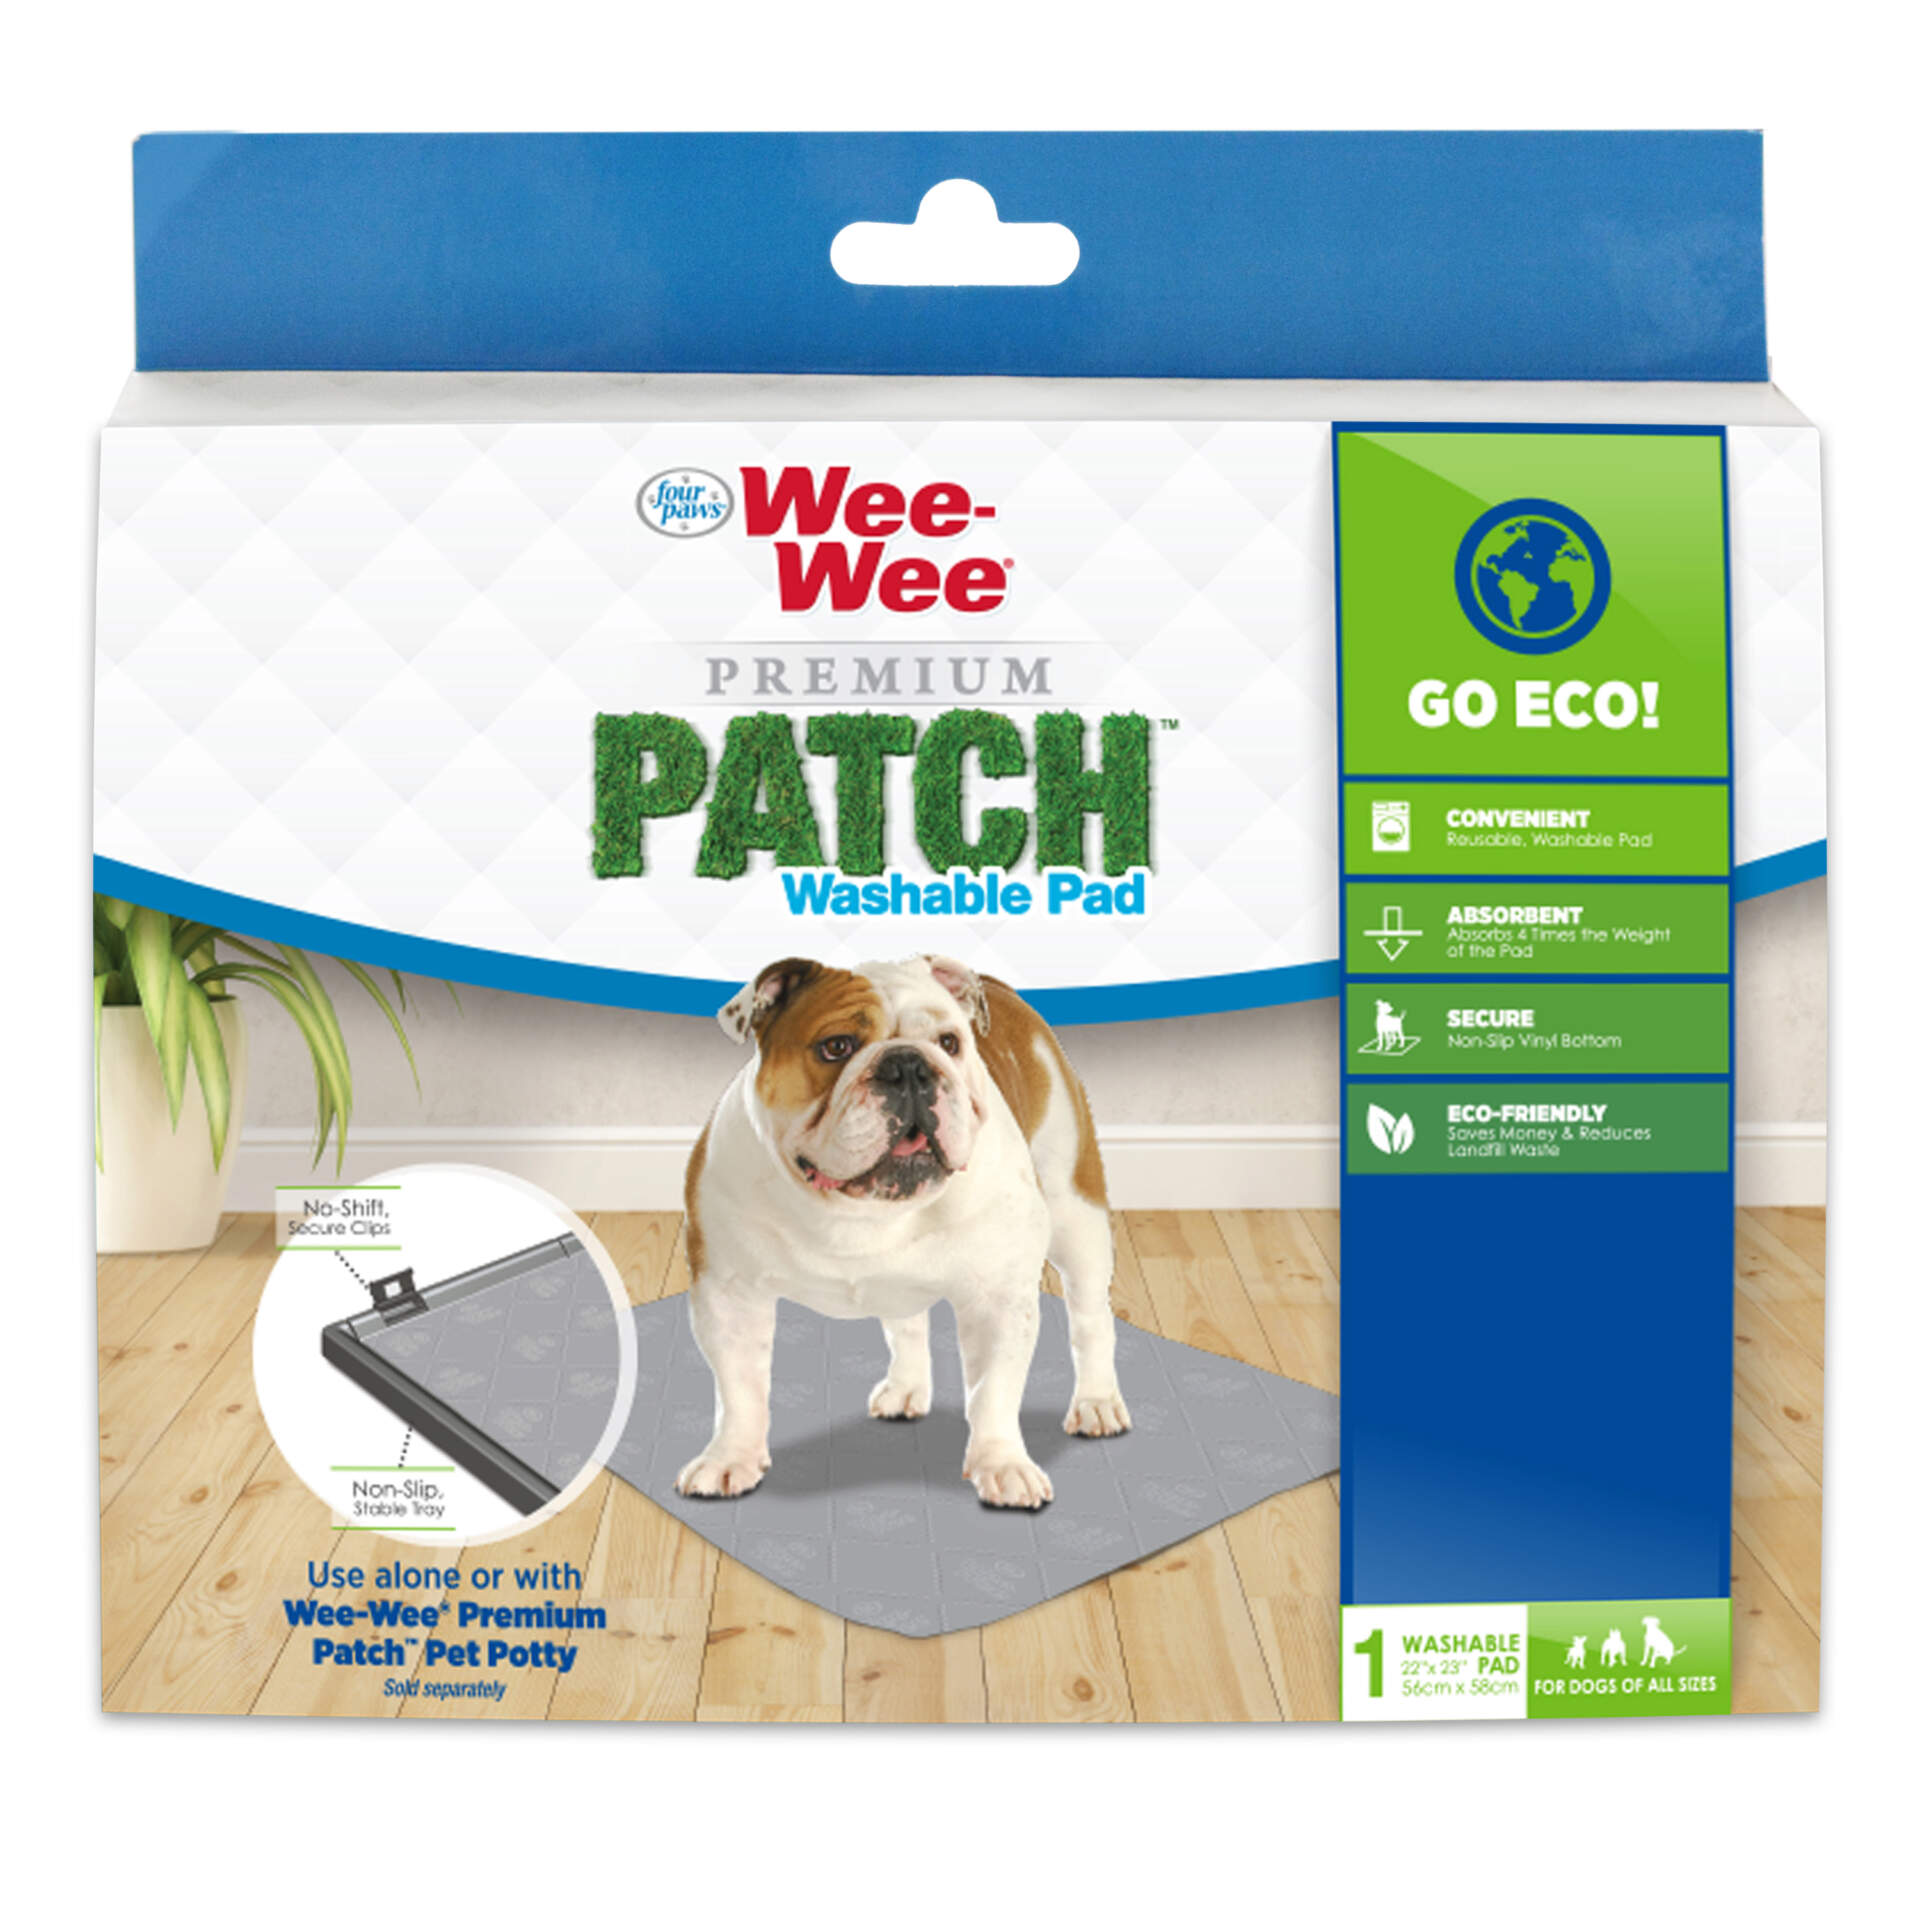 Wee Wee Puppy Pee Pads for Dogs 